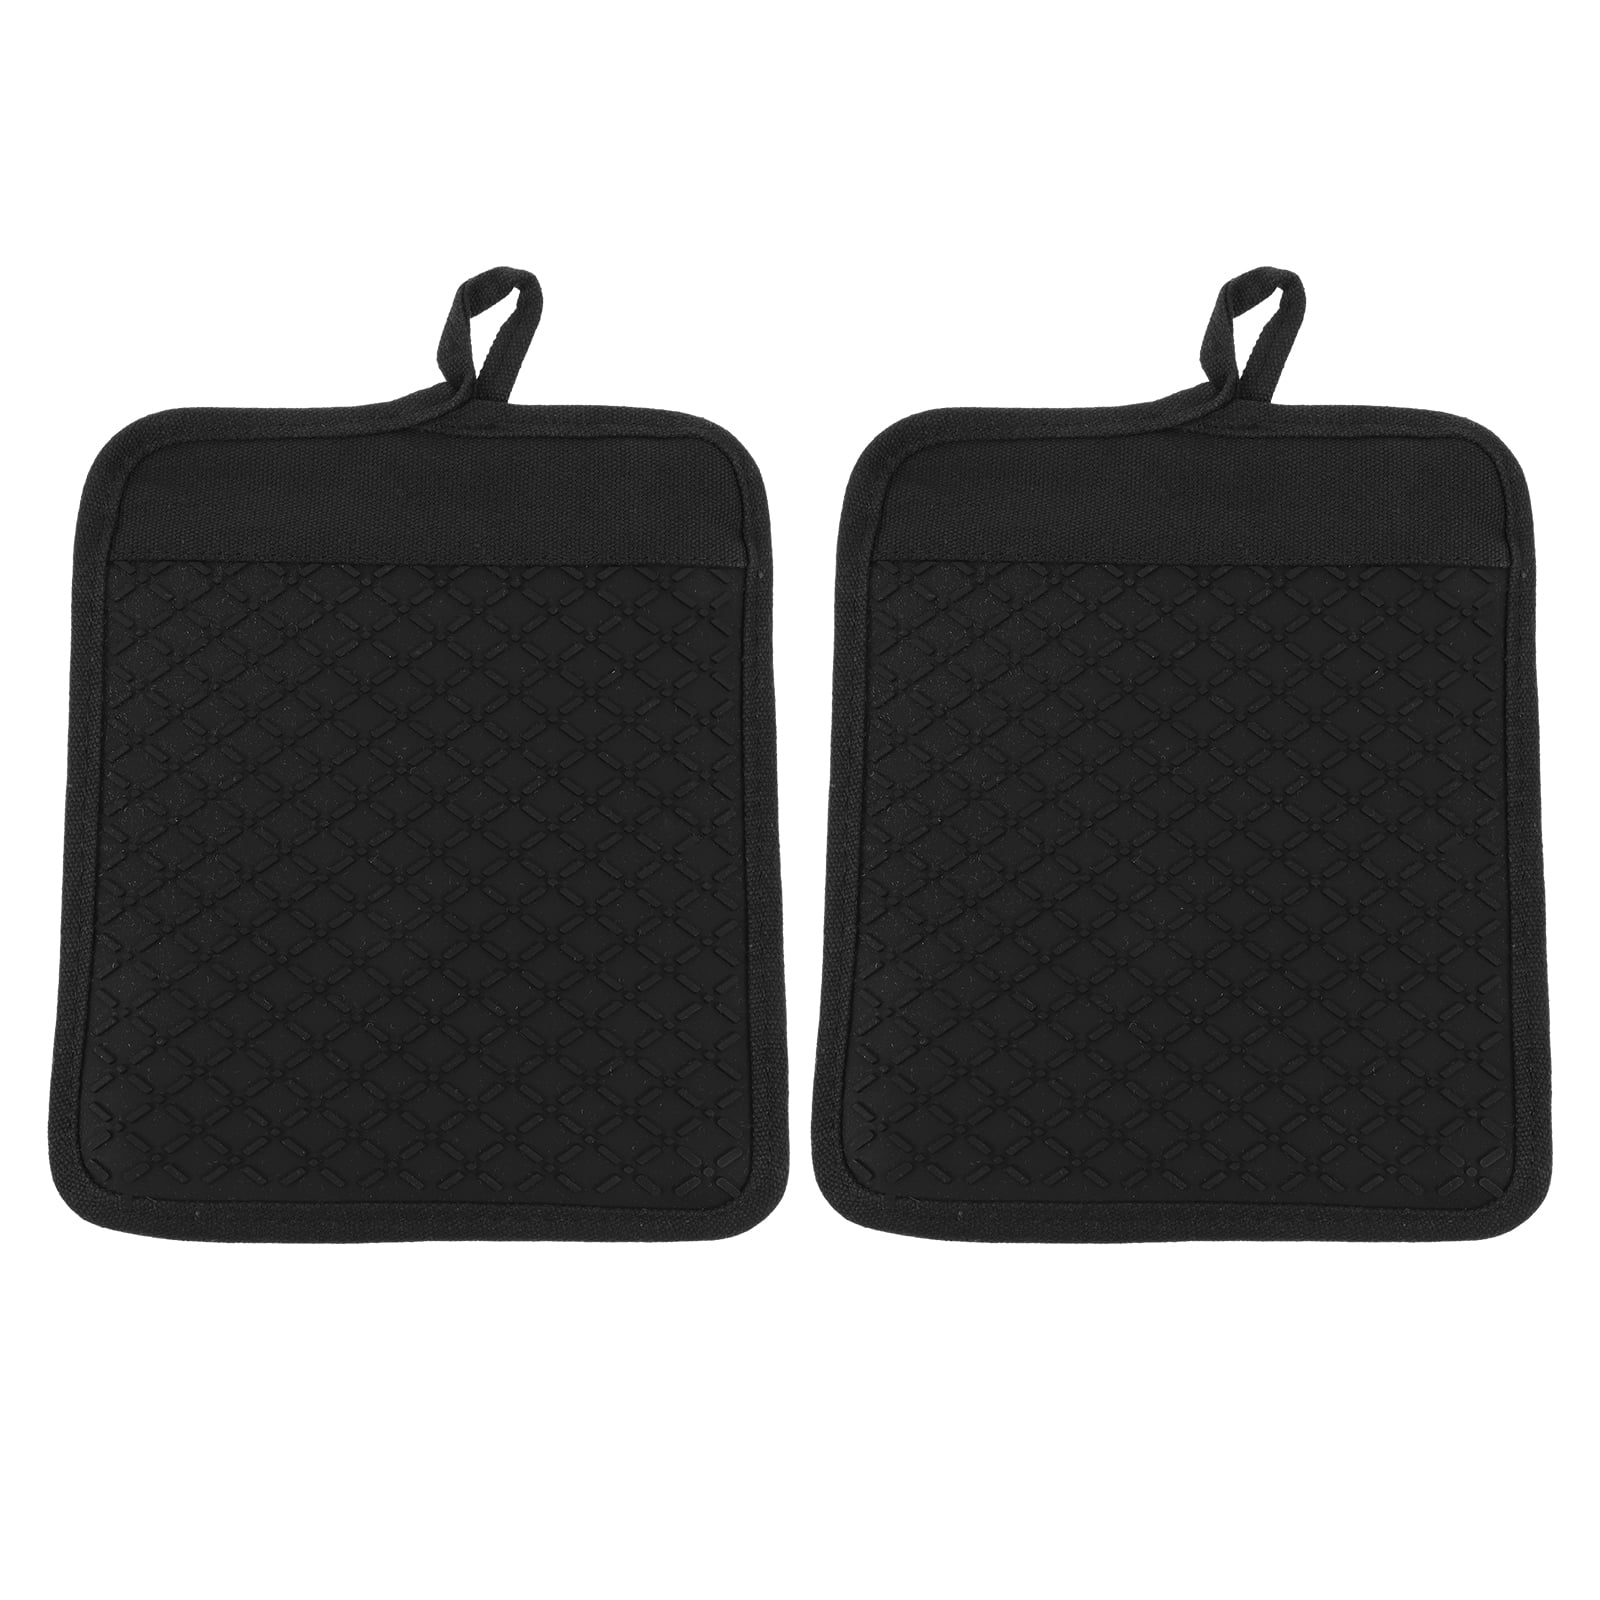 VHAUSE 2pcs Pot Holders for Kitchen - Cotton Oven Hot Pads Set with Non-Slip Silicone Grip and Pocket Heat Resistant Pans Handle Covers Potholders